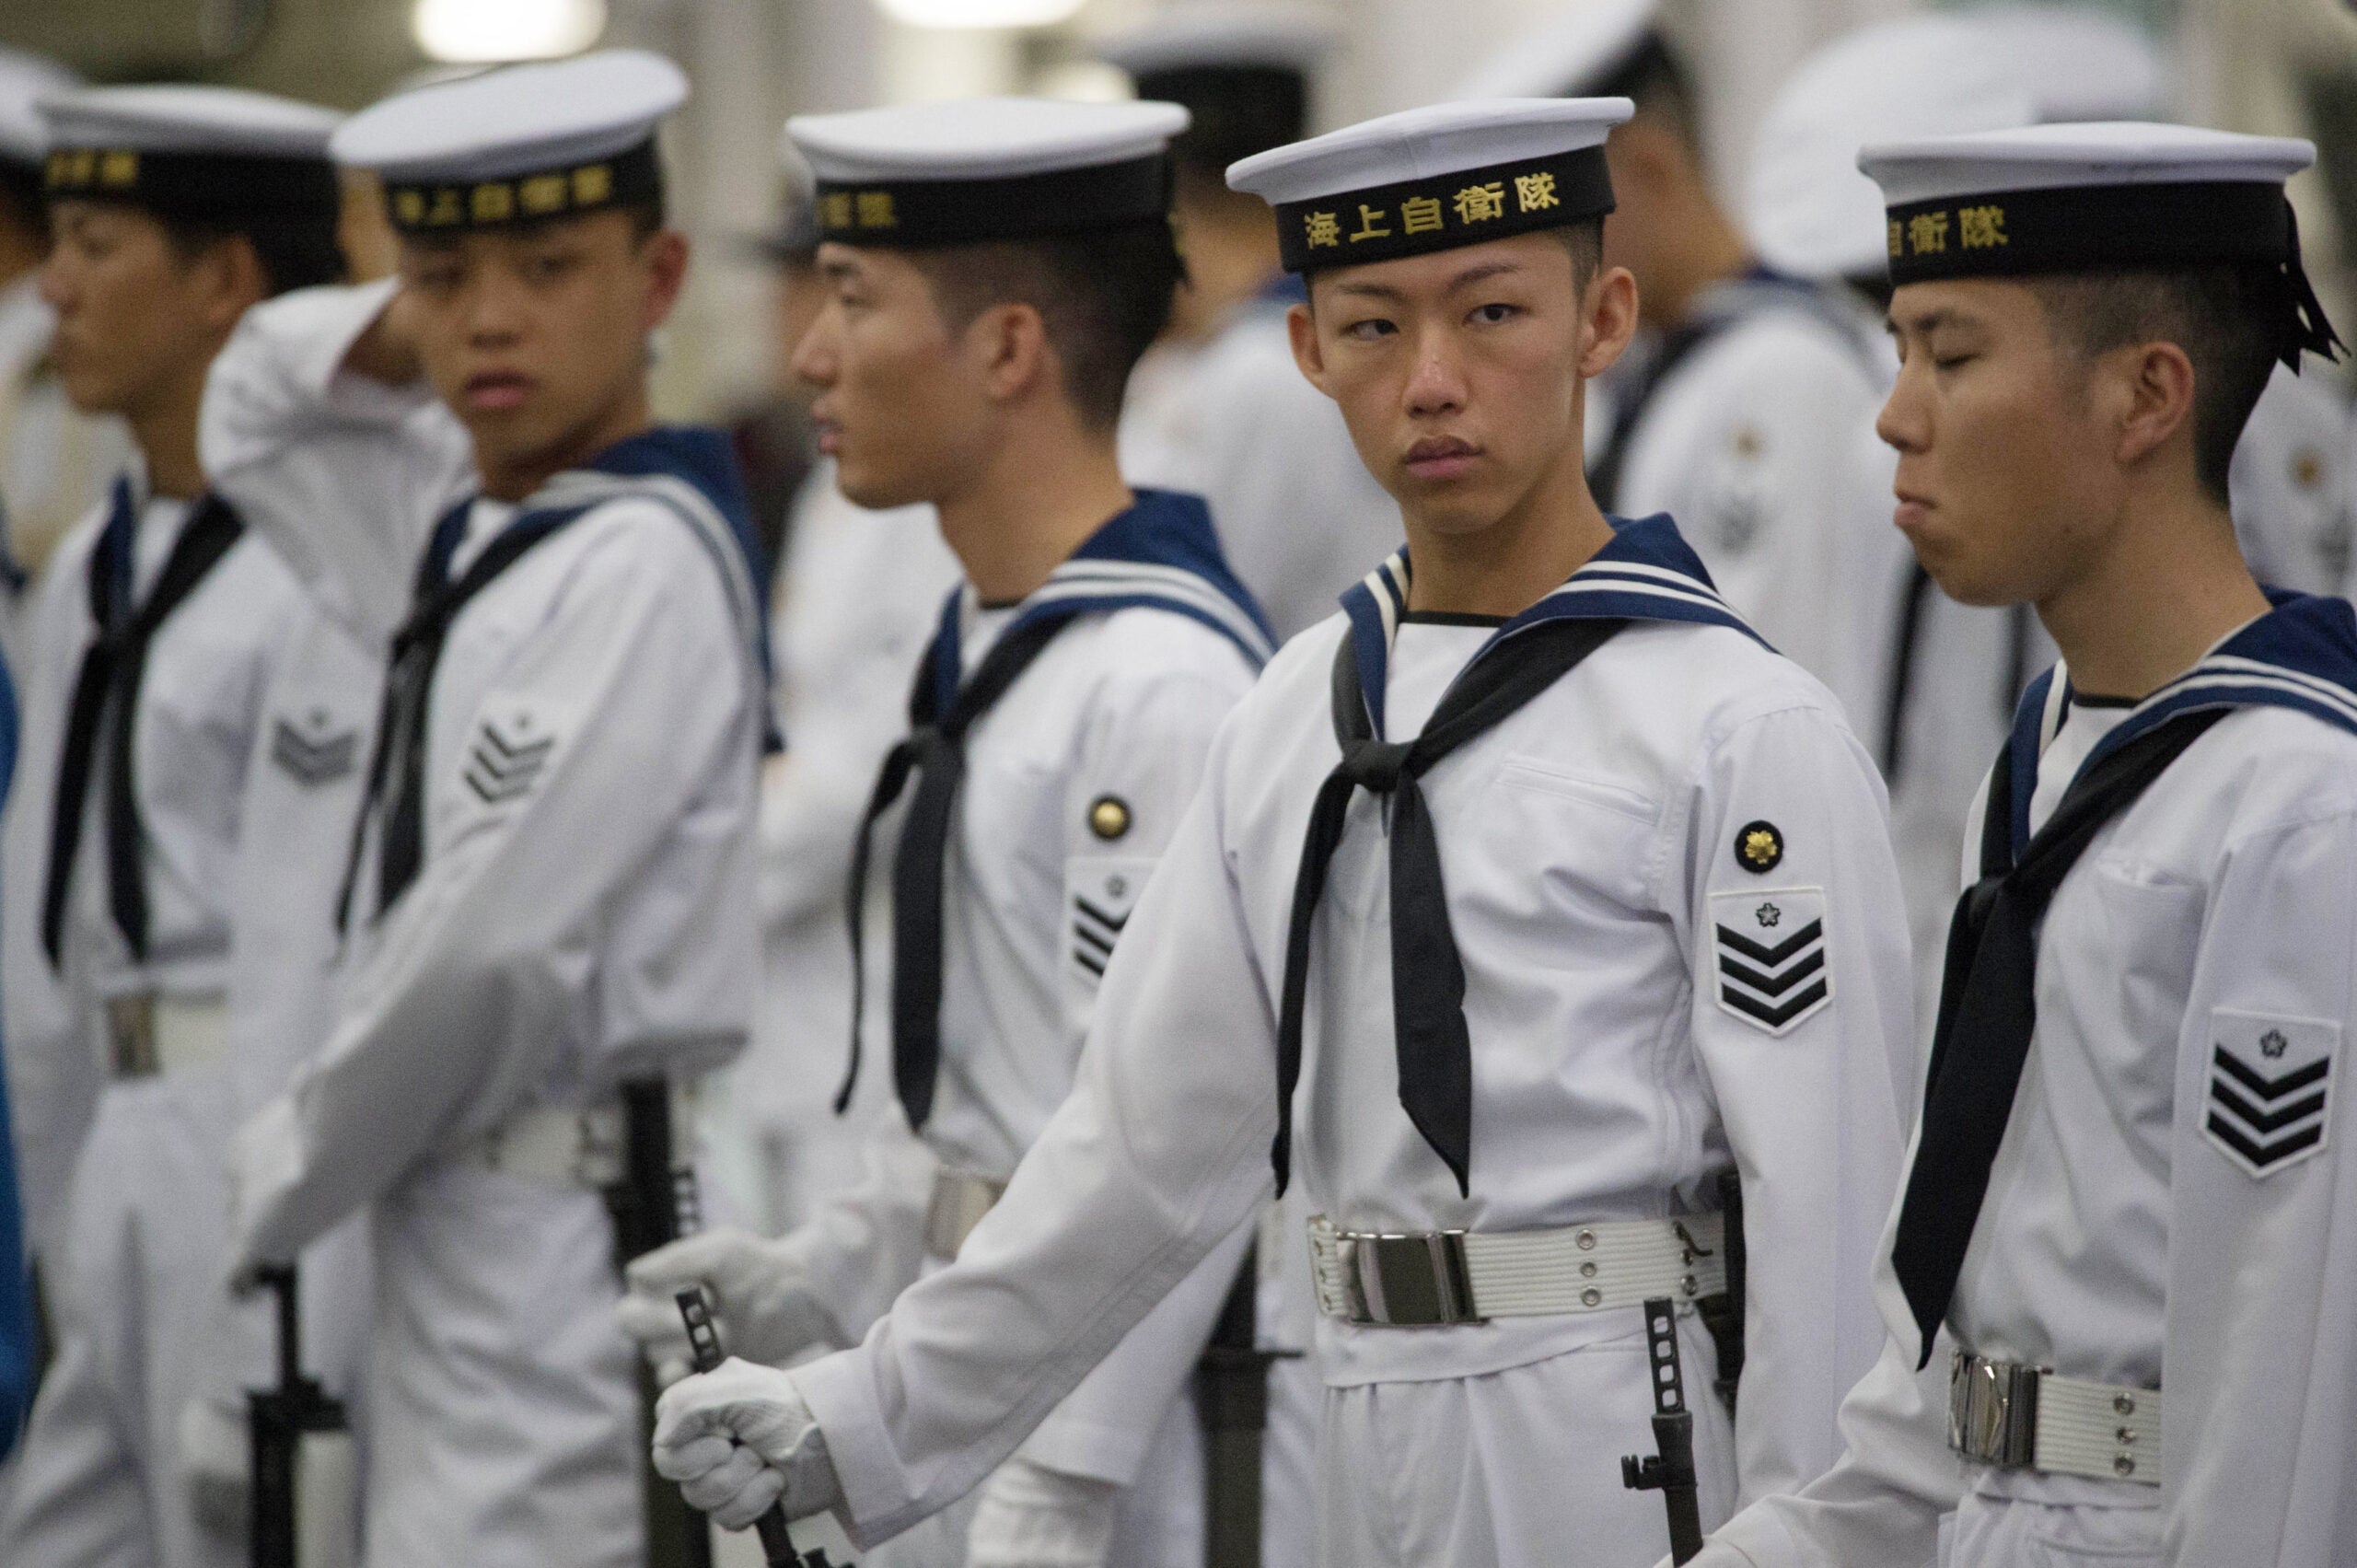 Sailors await for the arrival of Prime Minister Theresa May who met crew and naval personnel including those from the British Royal Navy on board the Japanese aircraft carrier, J.S. Izumo at Yokosuka Naval Base near Tokyo, Japan. (Photo by Stefan Rousseau/PA Images via Getty Images)